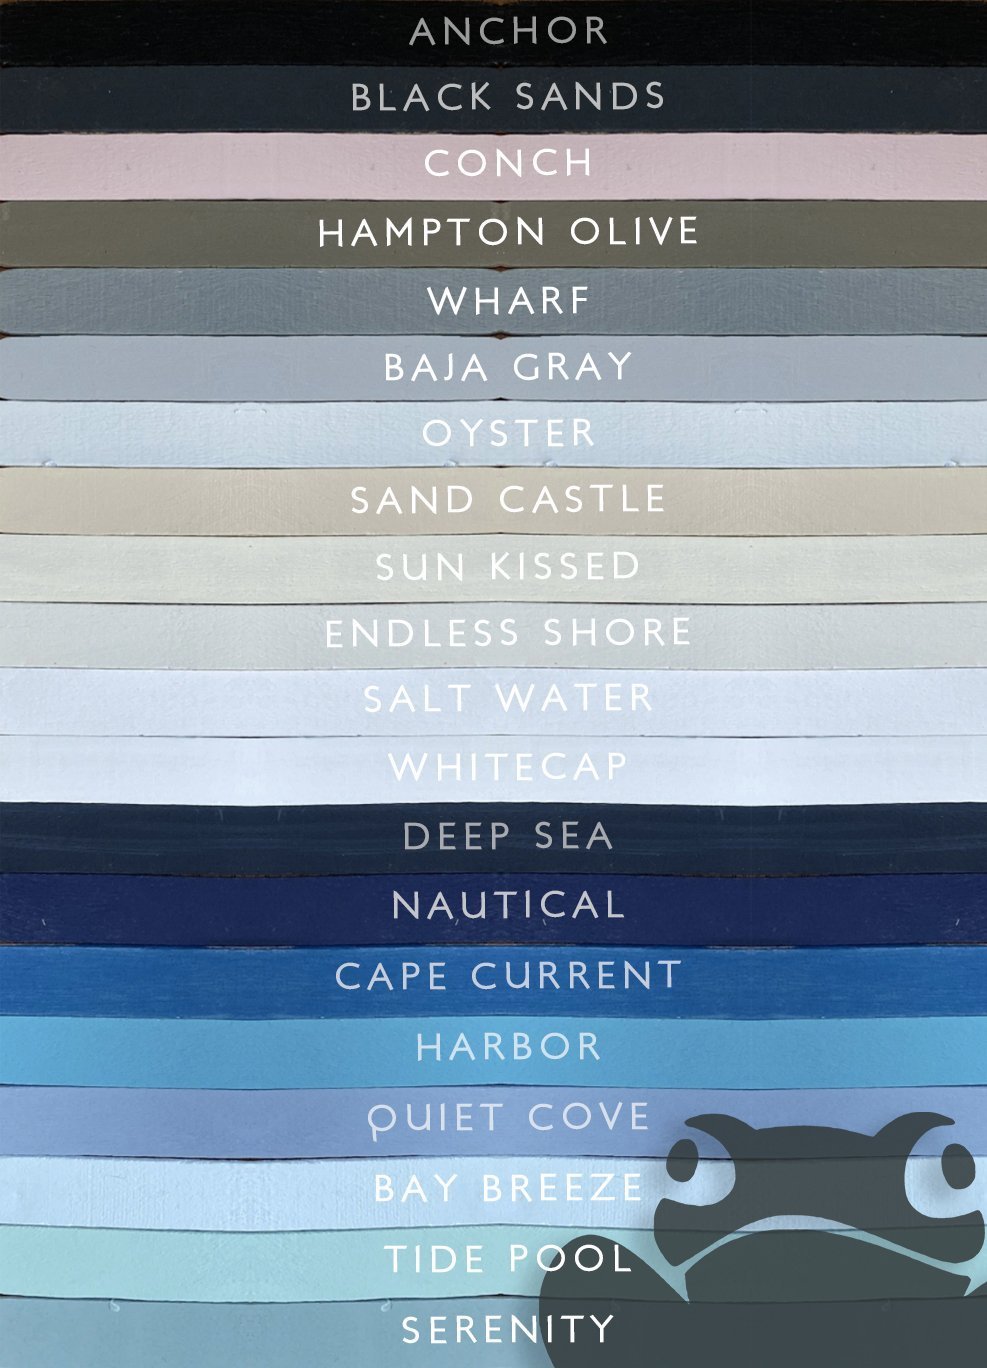 deep sea silk all in one mineral paint dixie belle furniture paintdixie belle furniture paint 339578 1024x